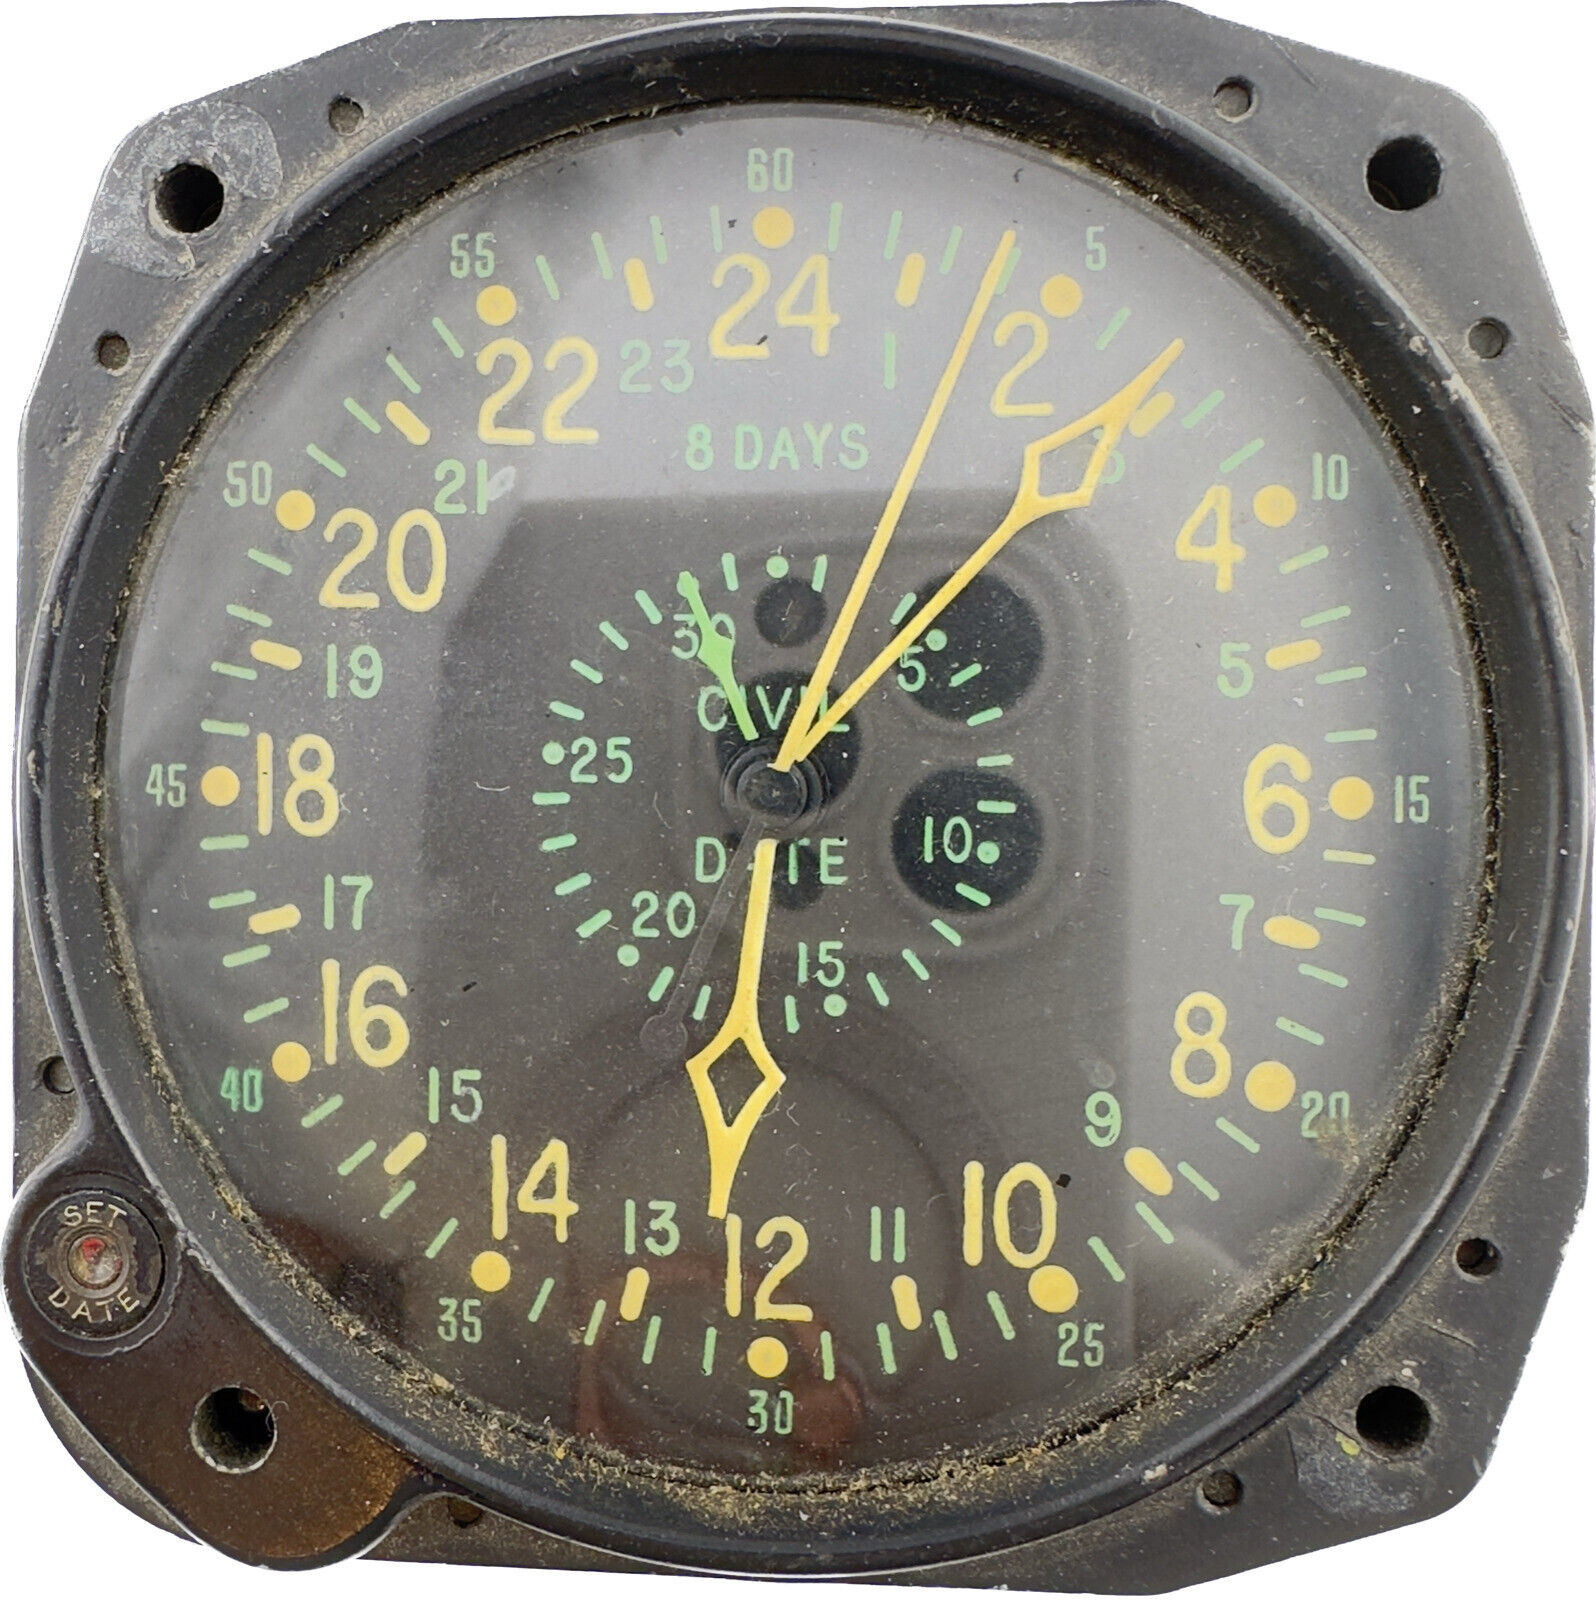 Vintage Waltham Civil Date Military Mechanical Aircraft Clock  w 24 Hour Dial